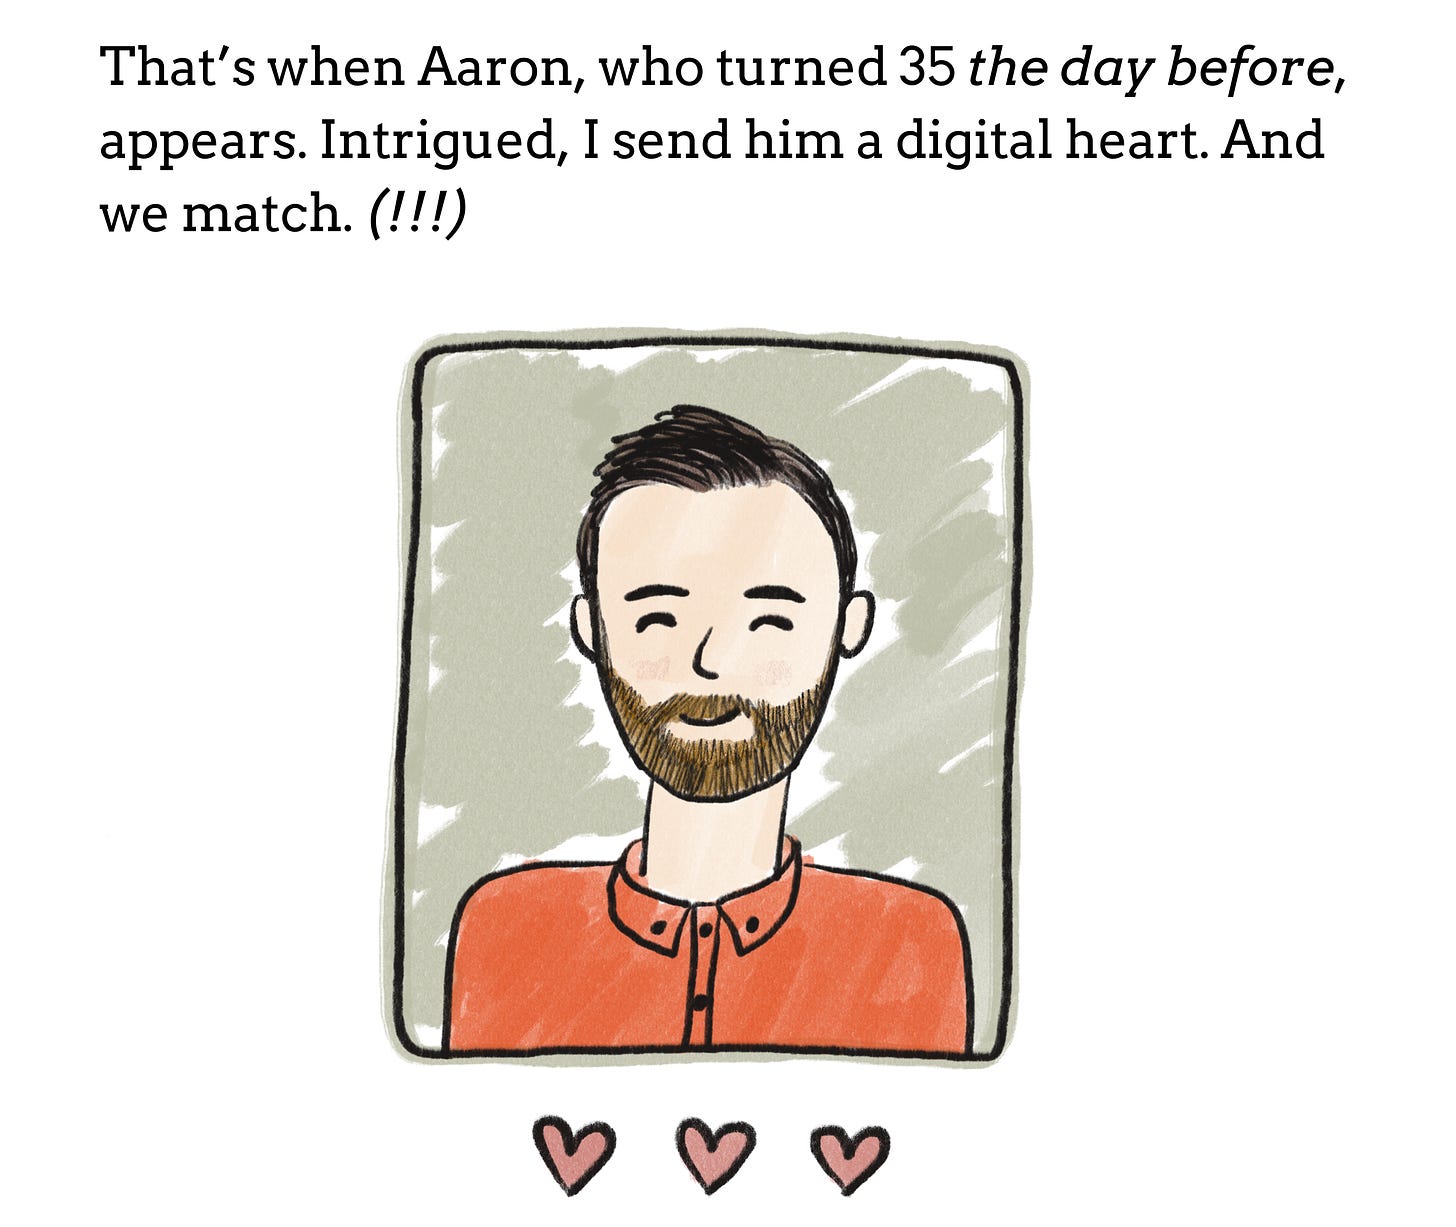 An illustration of the a white male with a brown beard and brown hair. He's wearing a red button up. The text reads: "That's when Aaron, who turned 35 the day before, appears. Intrigued, I send him a digital heart. And we match. (!!!)"